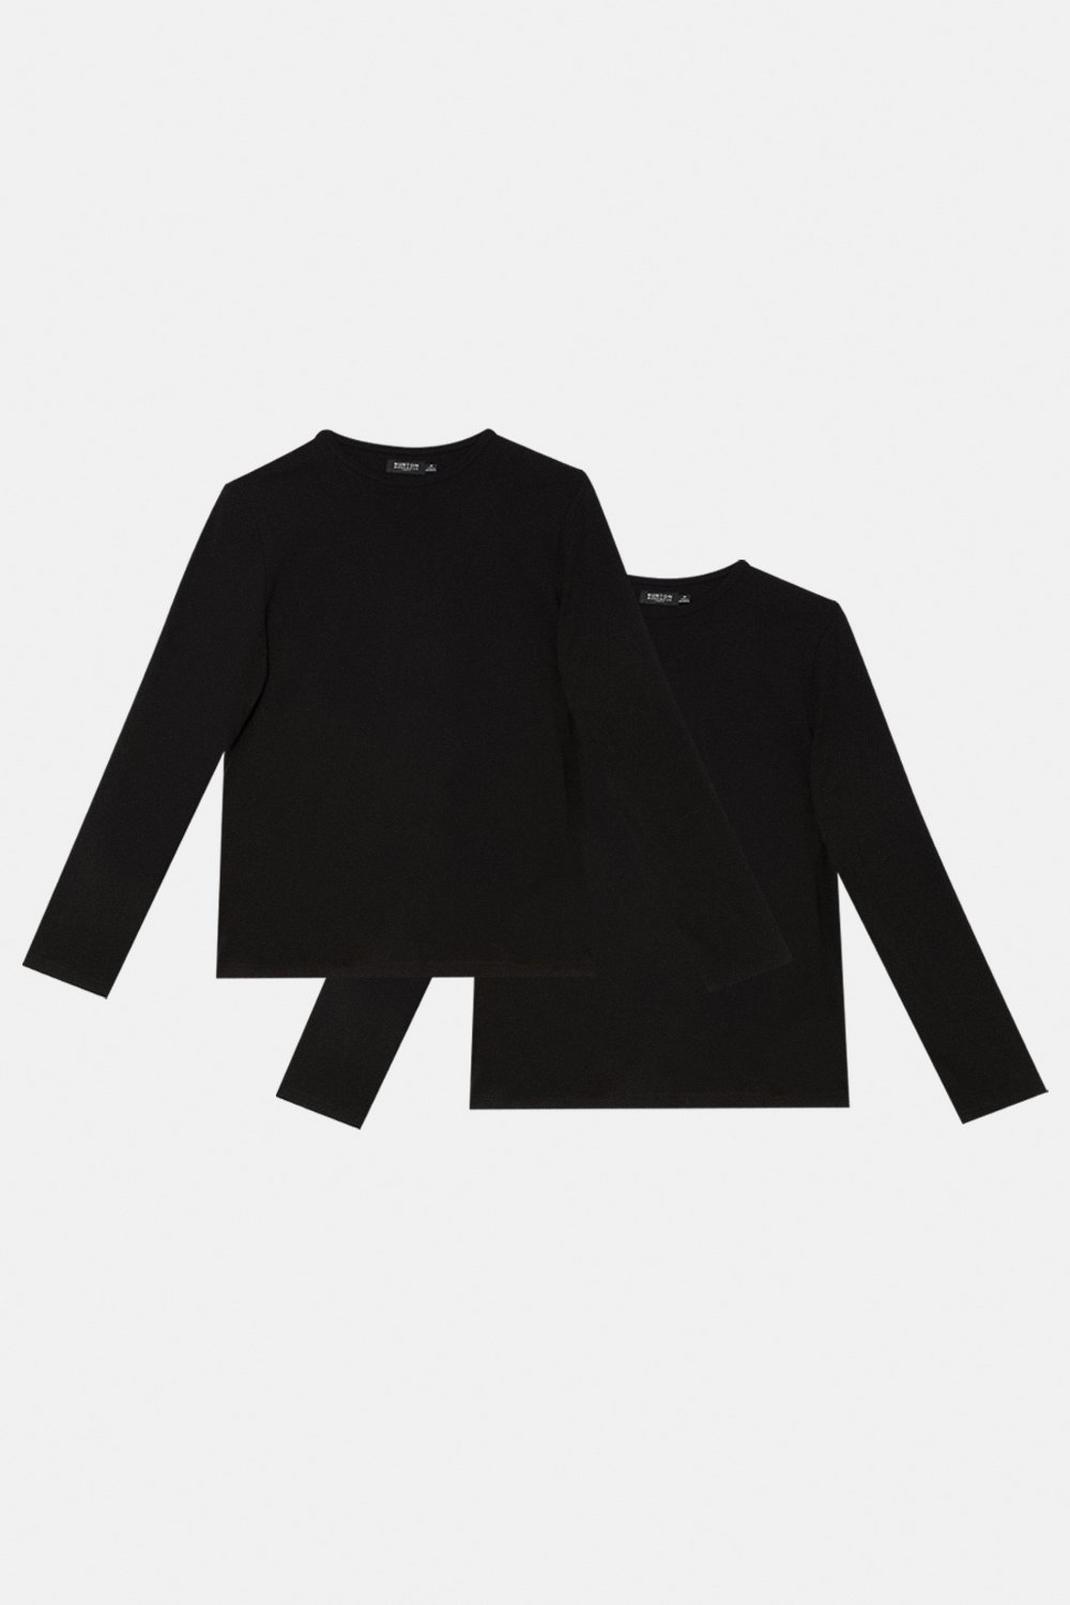 2 Pack Black Long Sleeve Crew Neck T-shirts image number 1